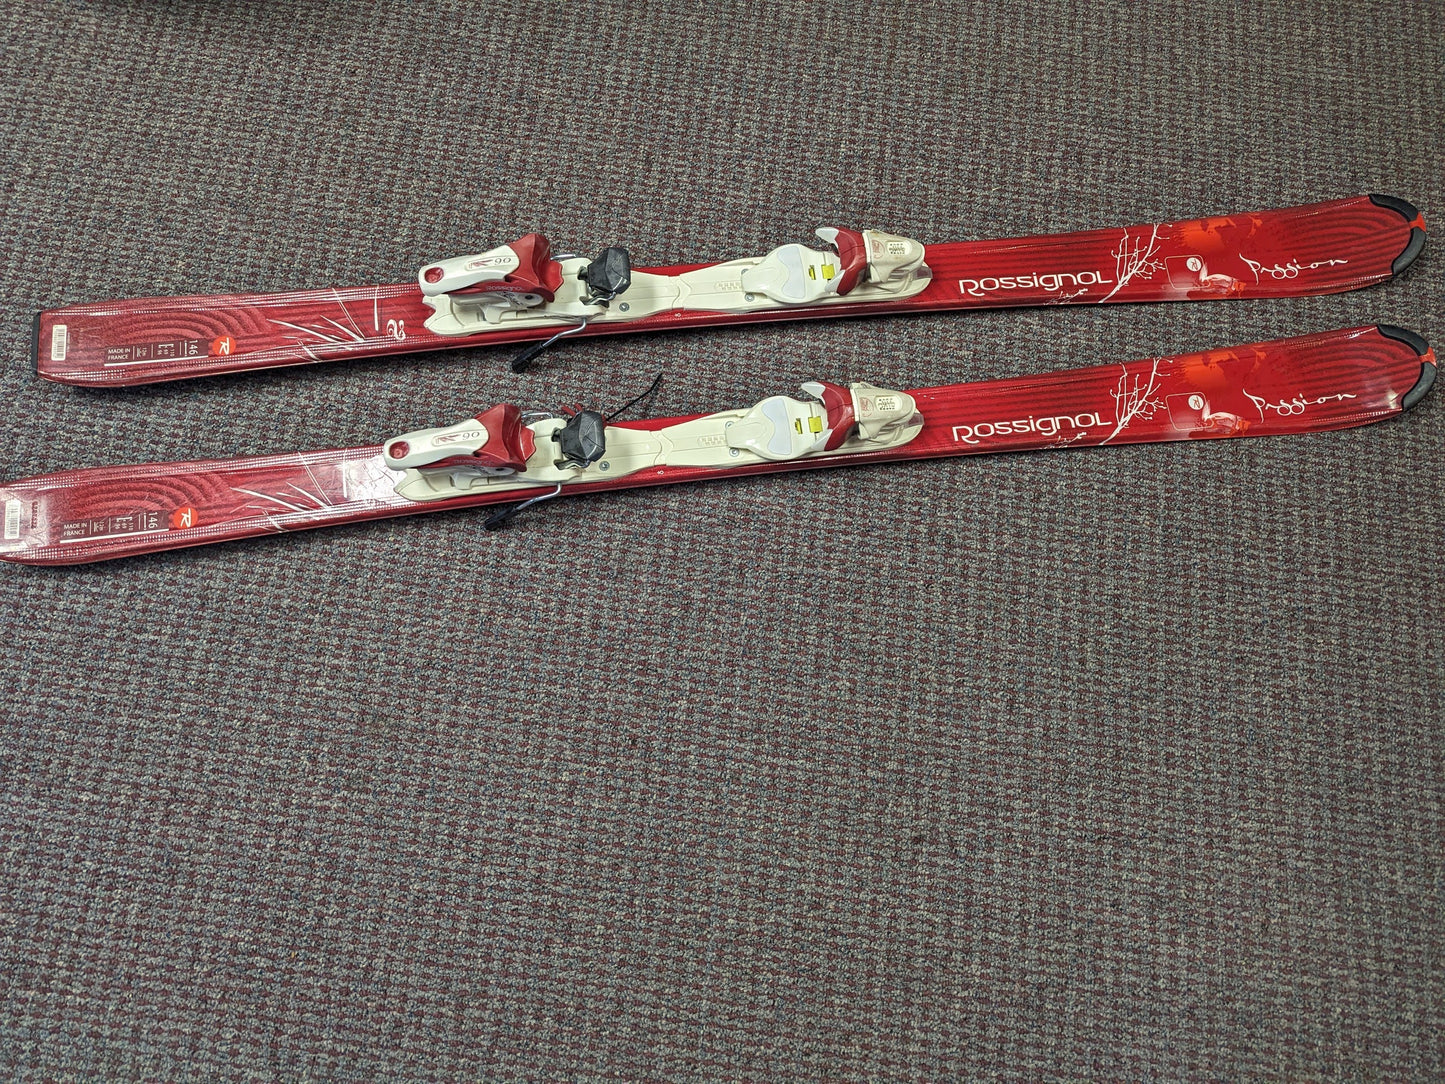 Rossignol Passion Youth Skis w/Rossignol Bindings Size 146 Cm Color Red Condition Used